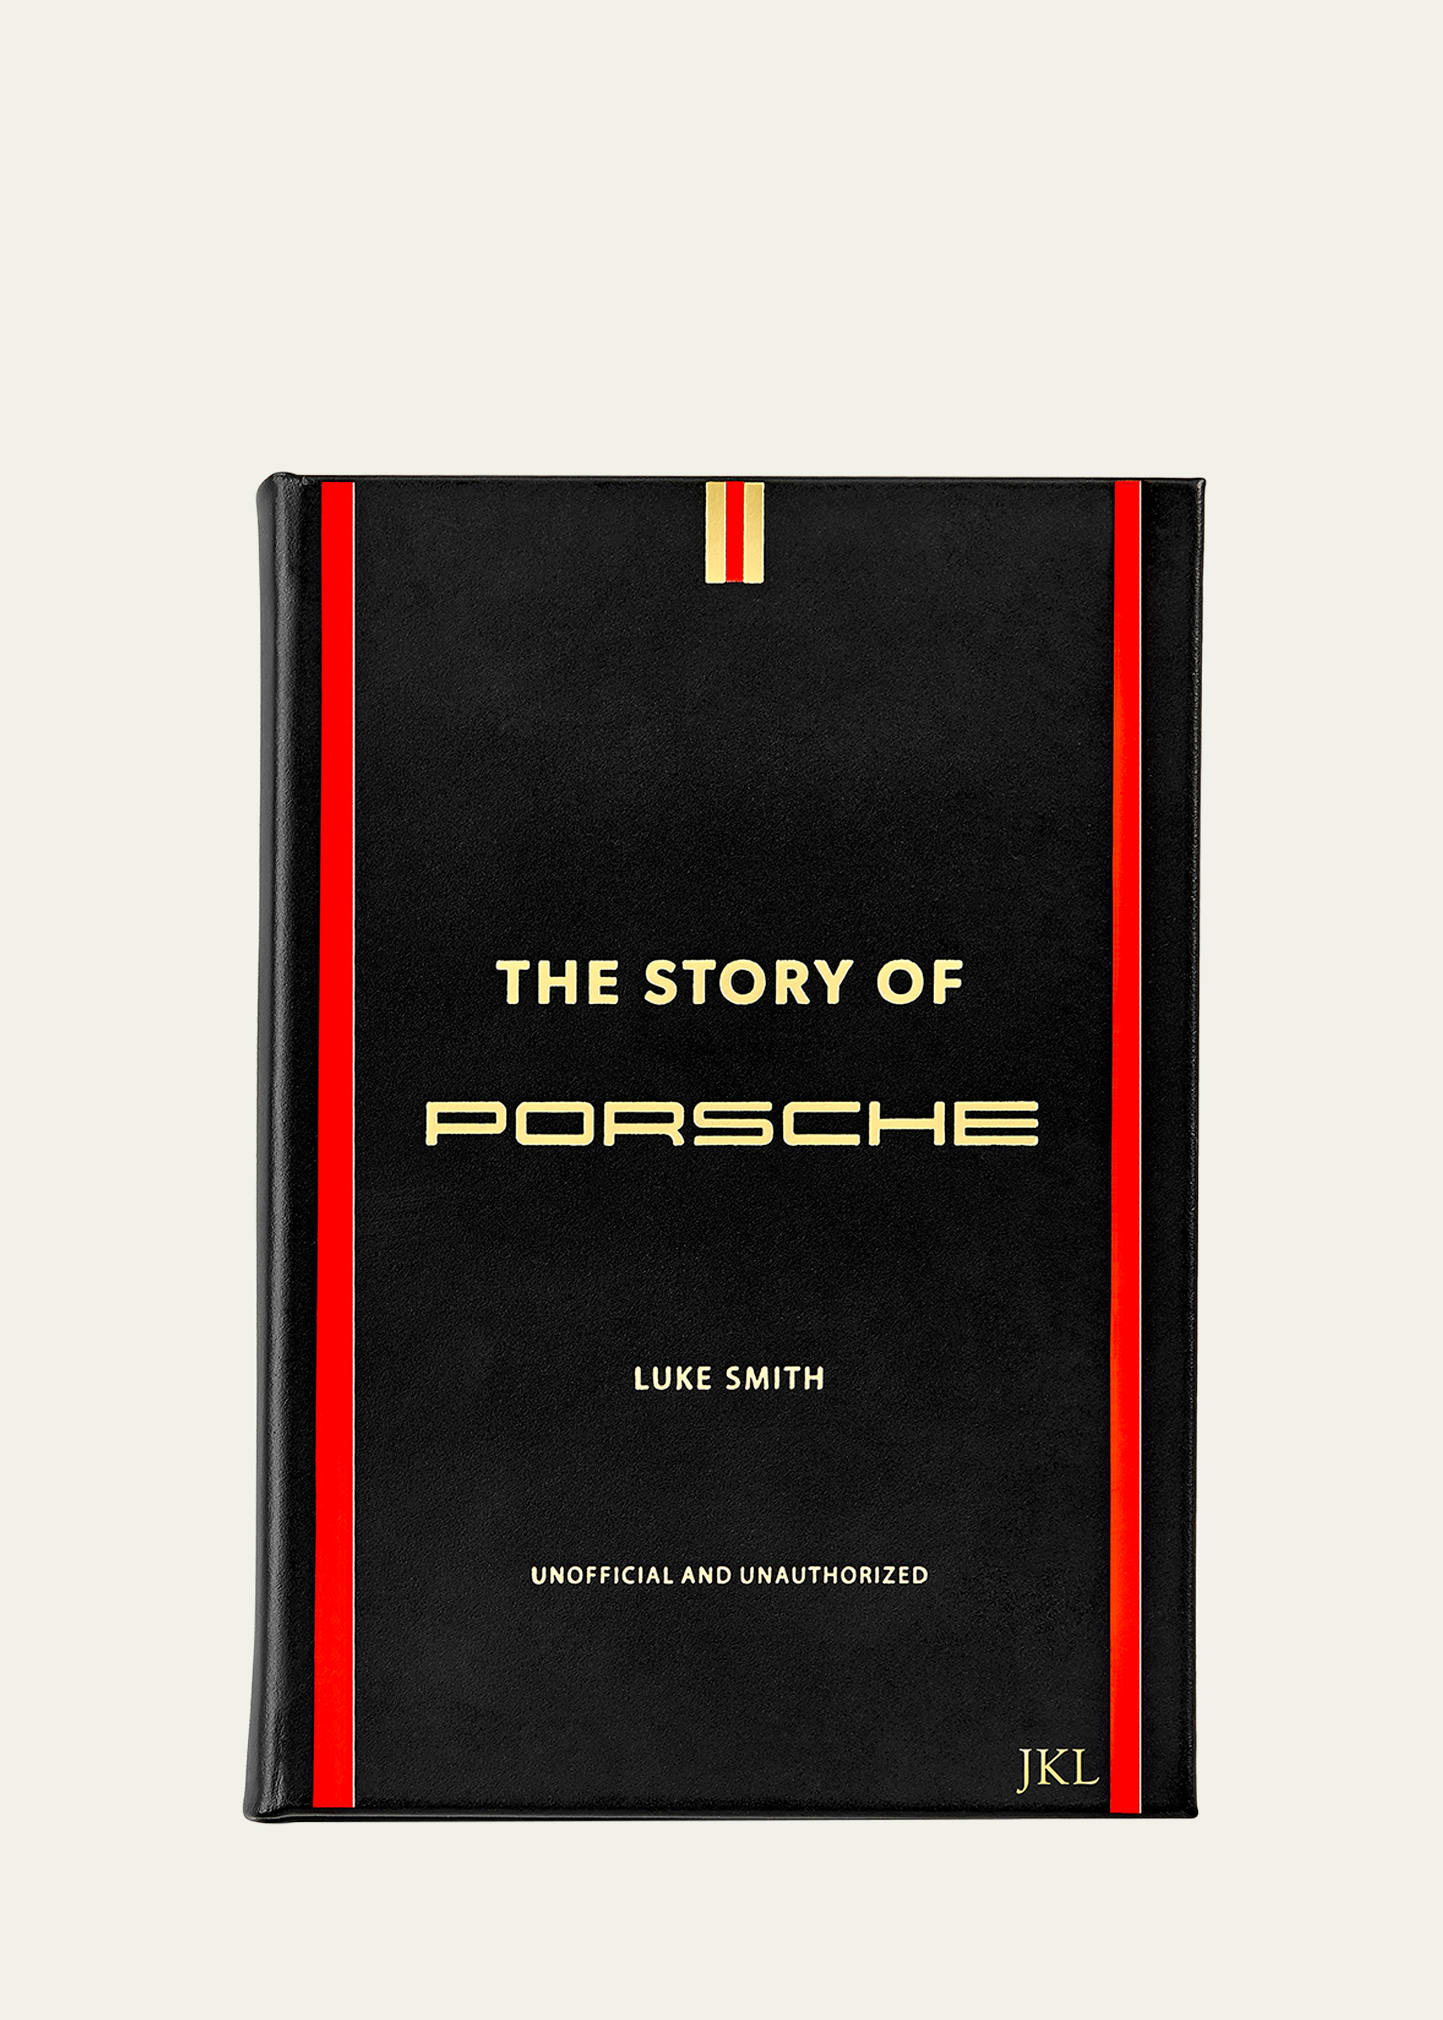 "The Story of Porsche" Book by Luke Smith